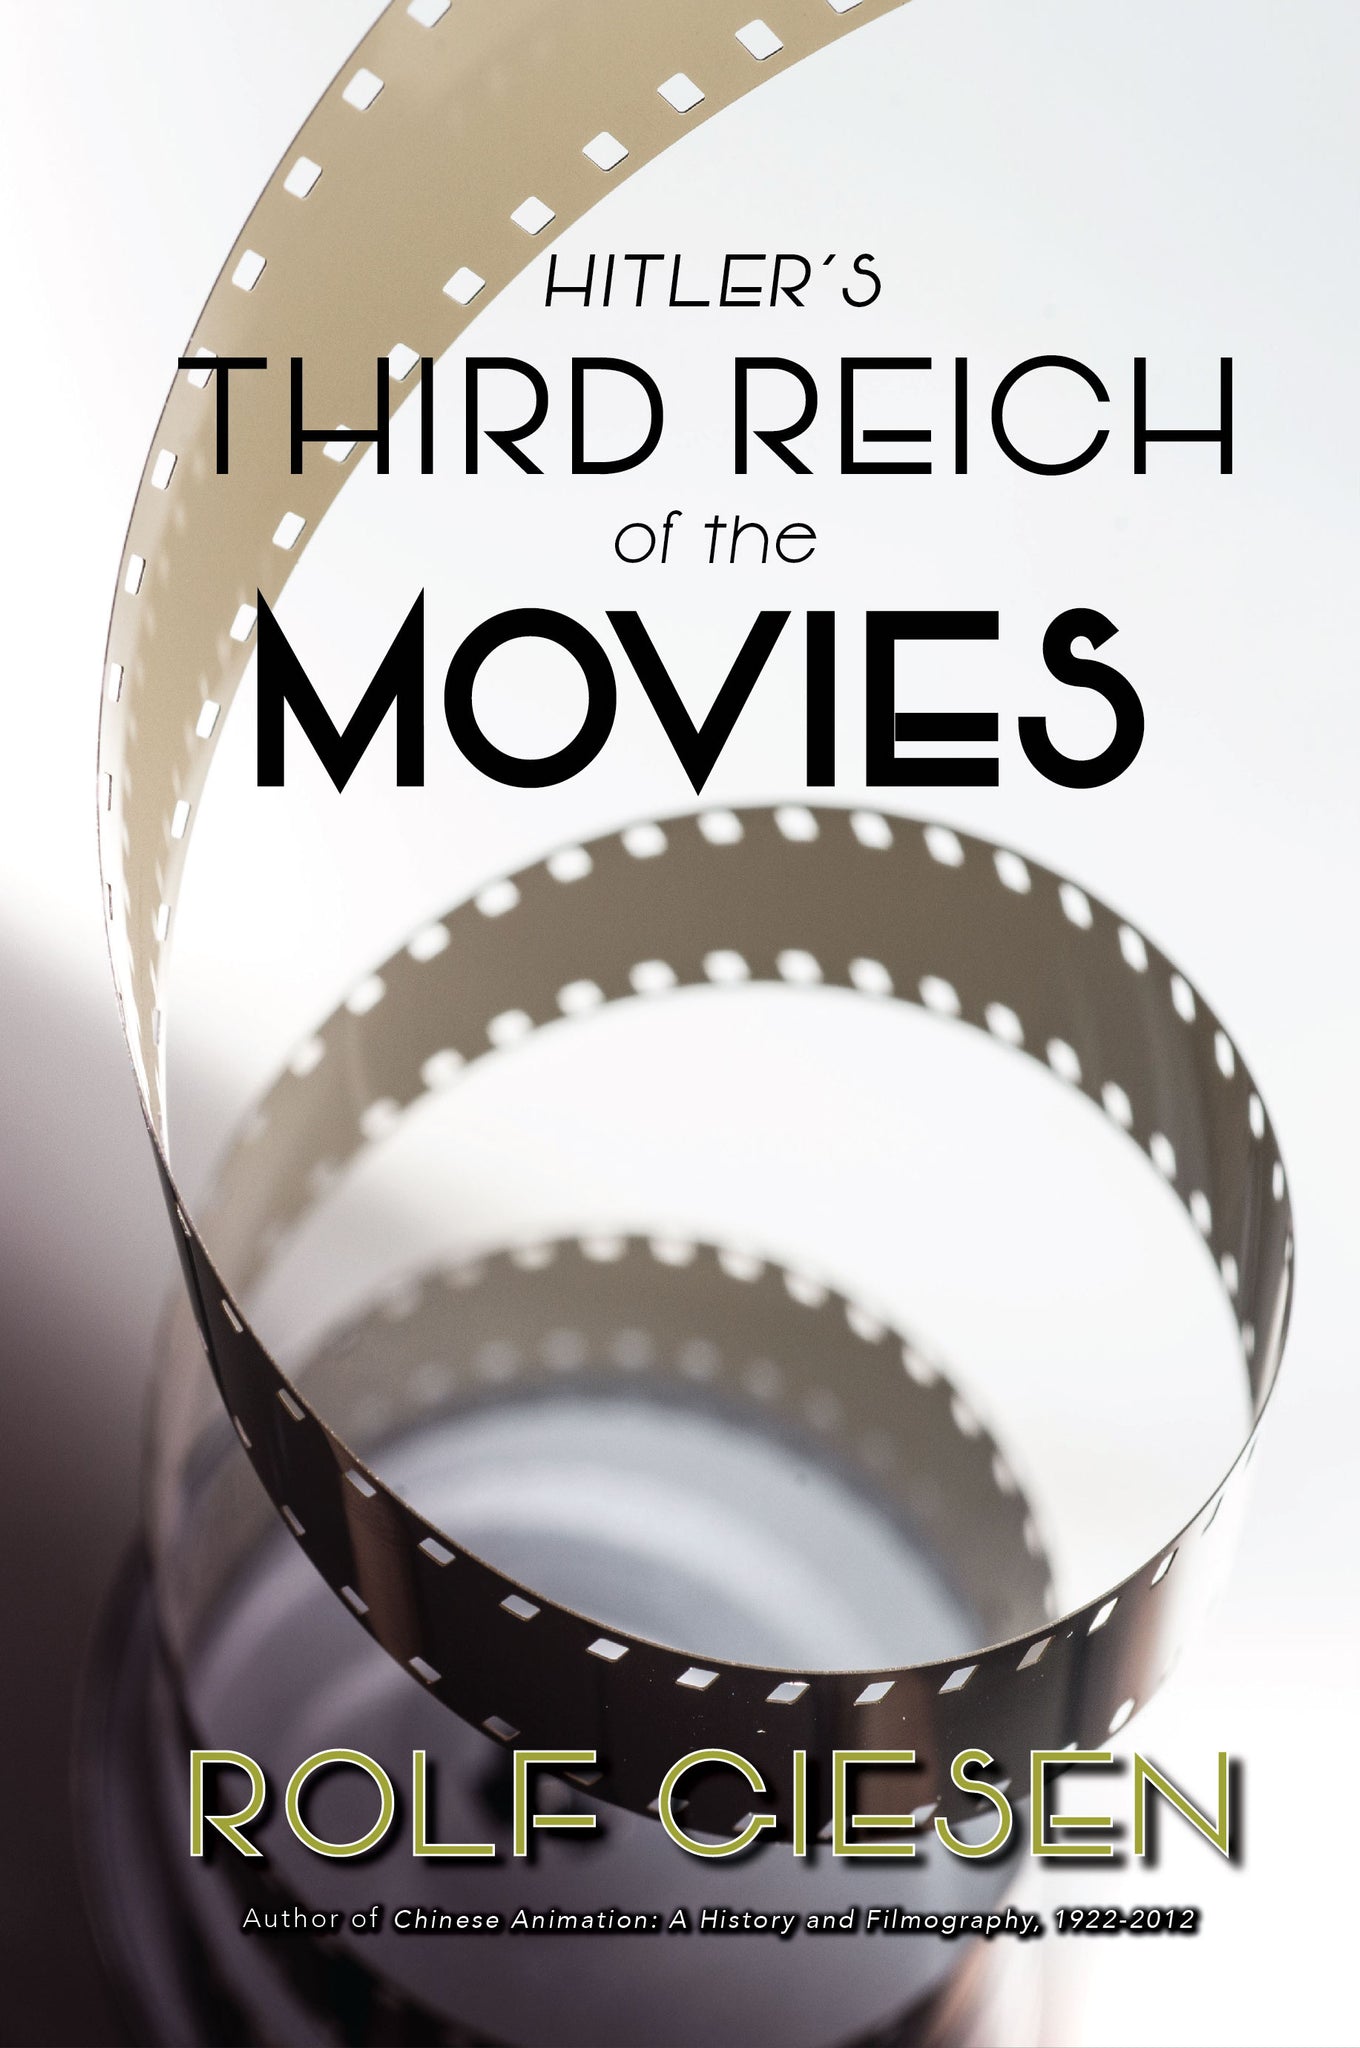 Hitler’s Third Reich of the Movies (hardback)